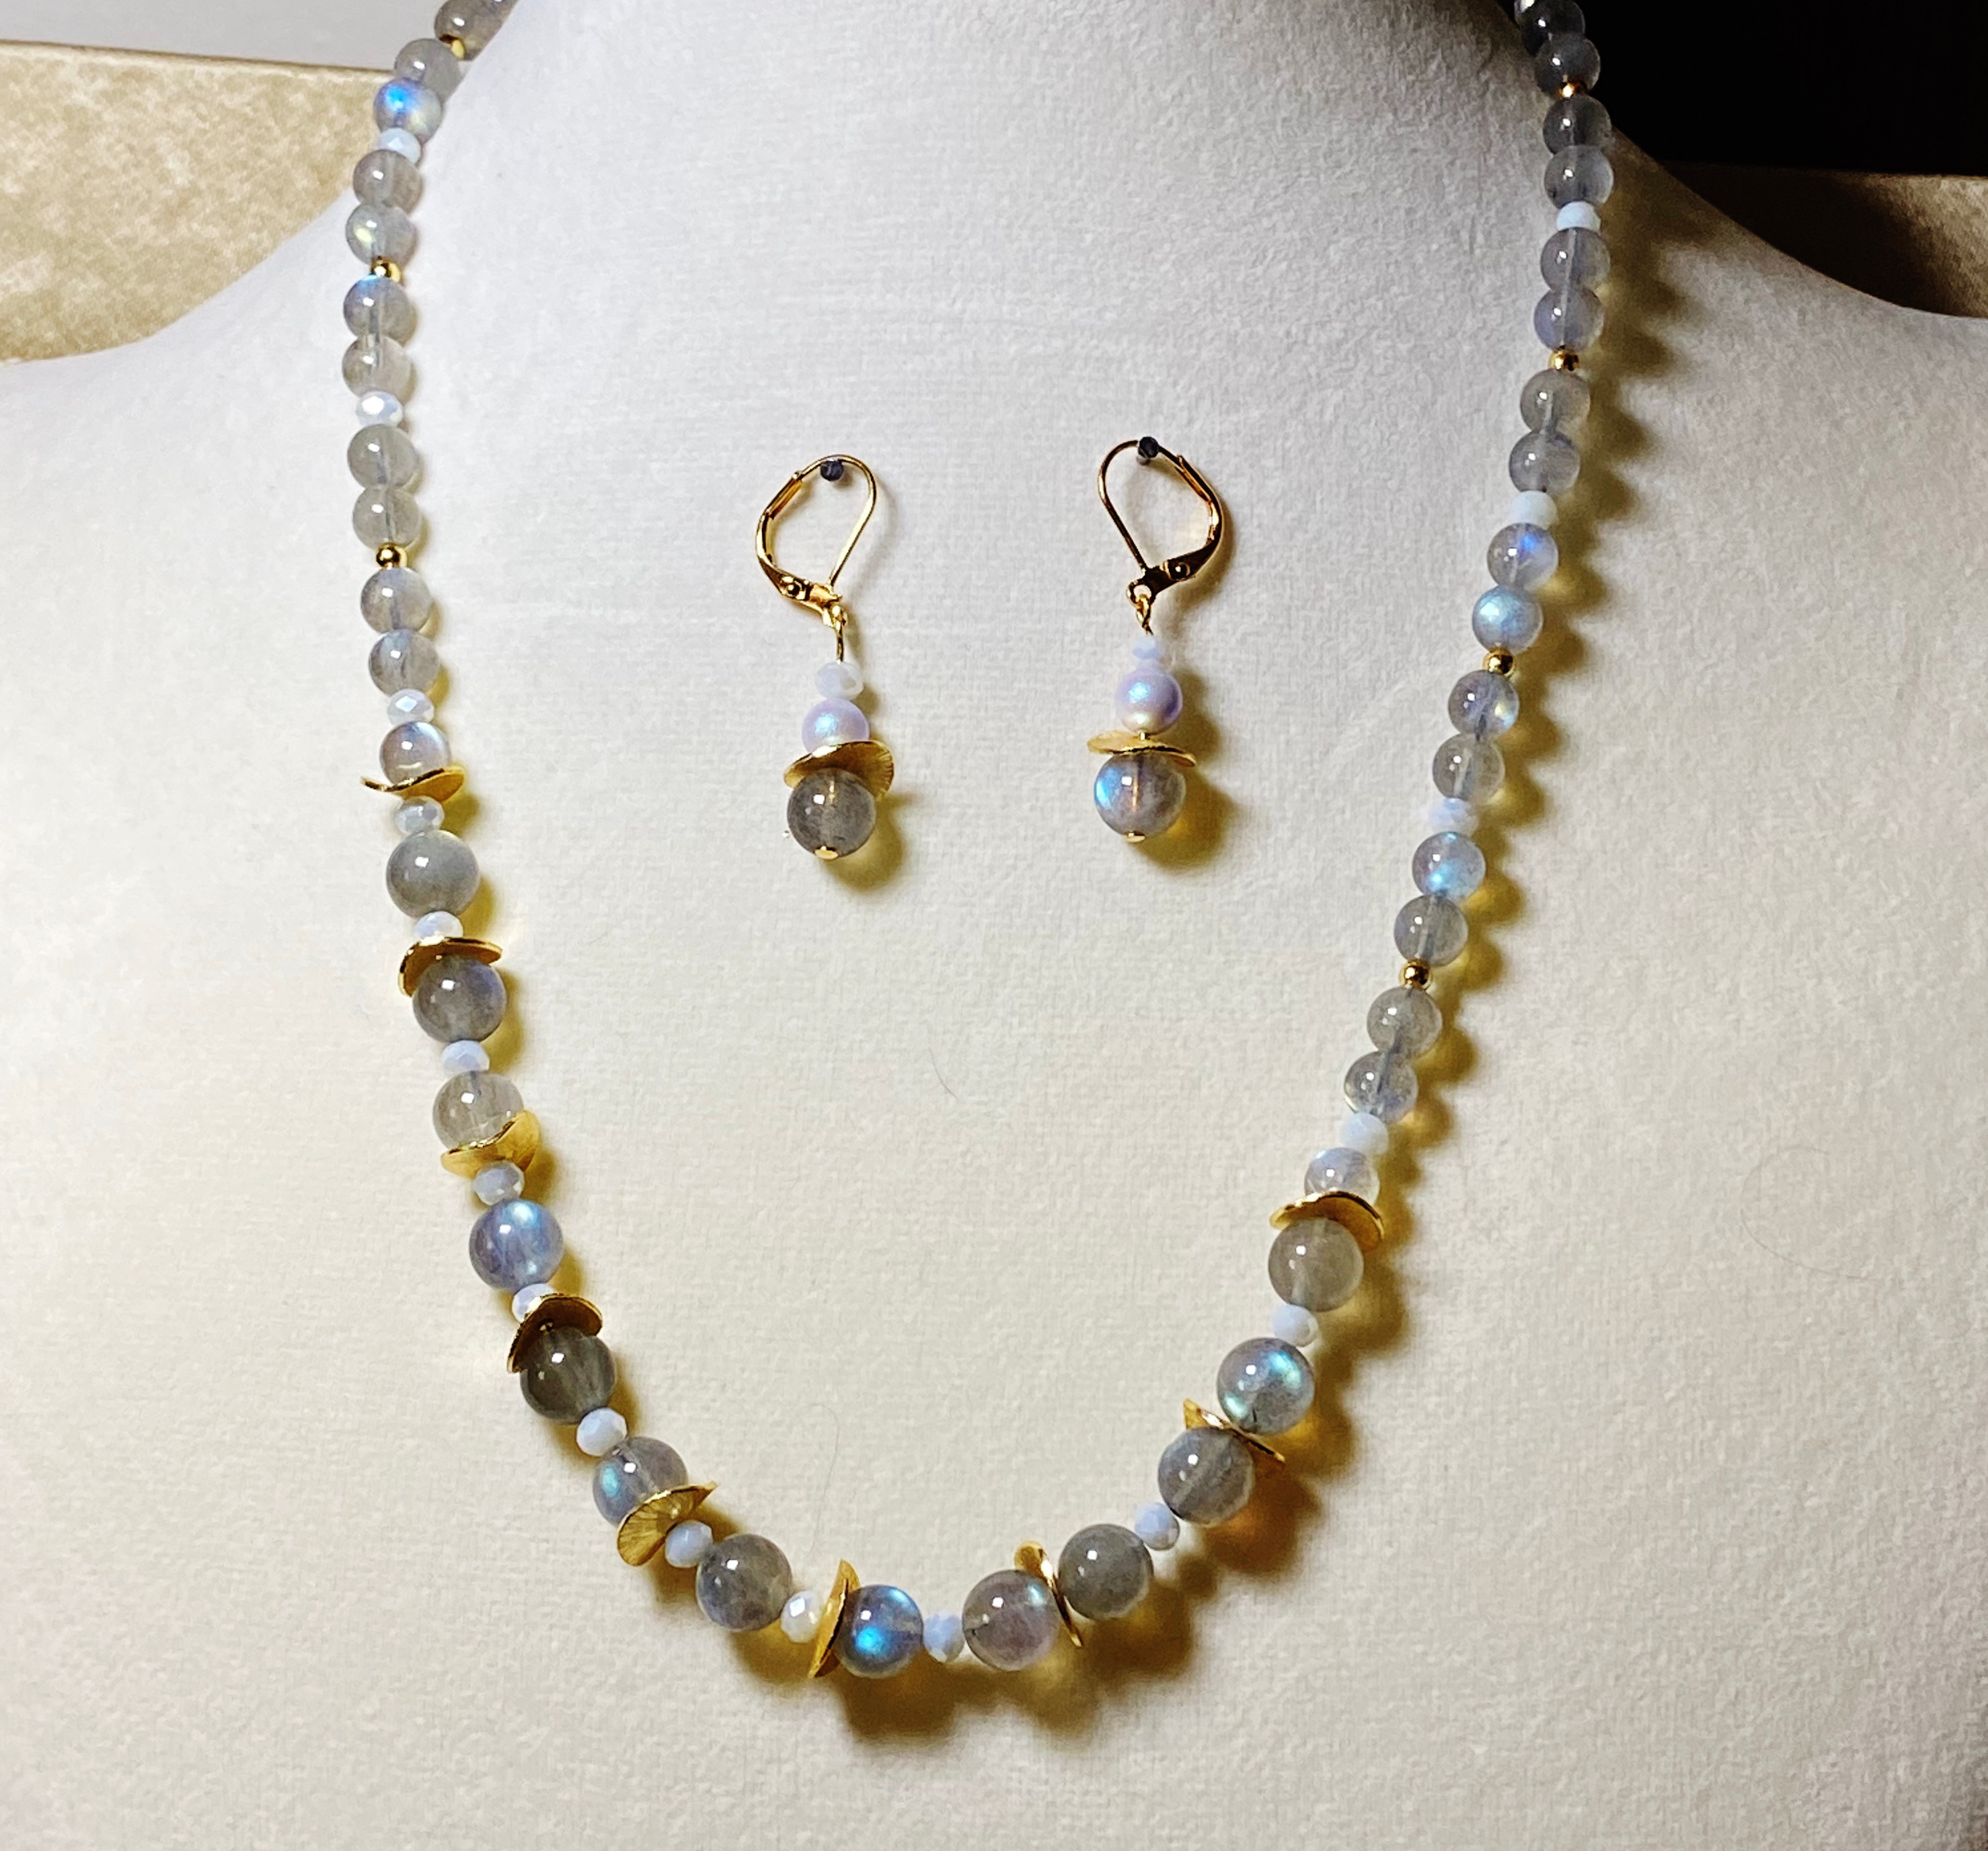 Picture of Labradorite and White Crystal Necklace-Earrings Set